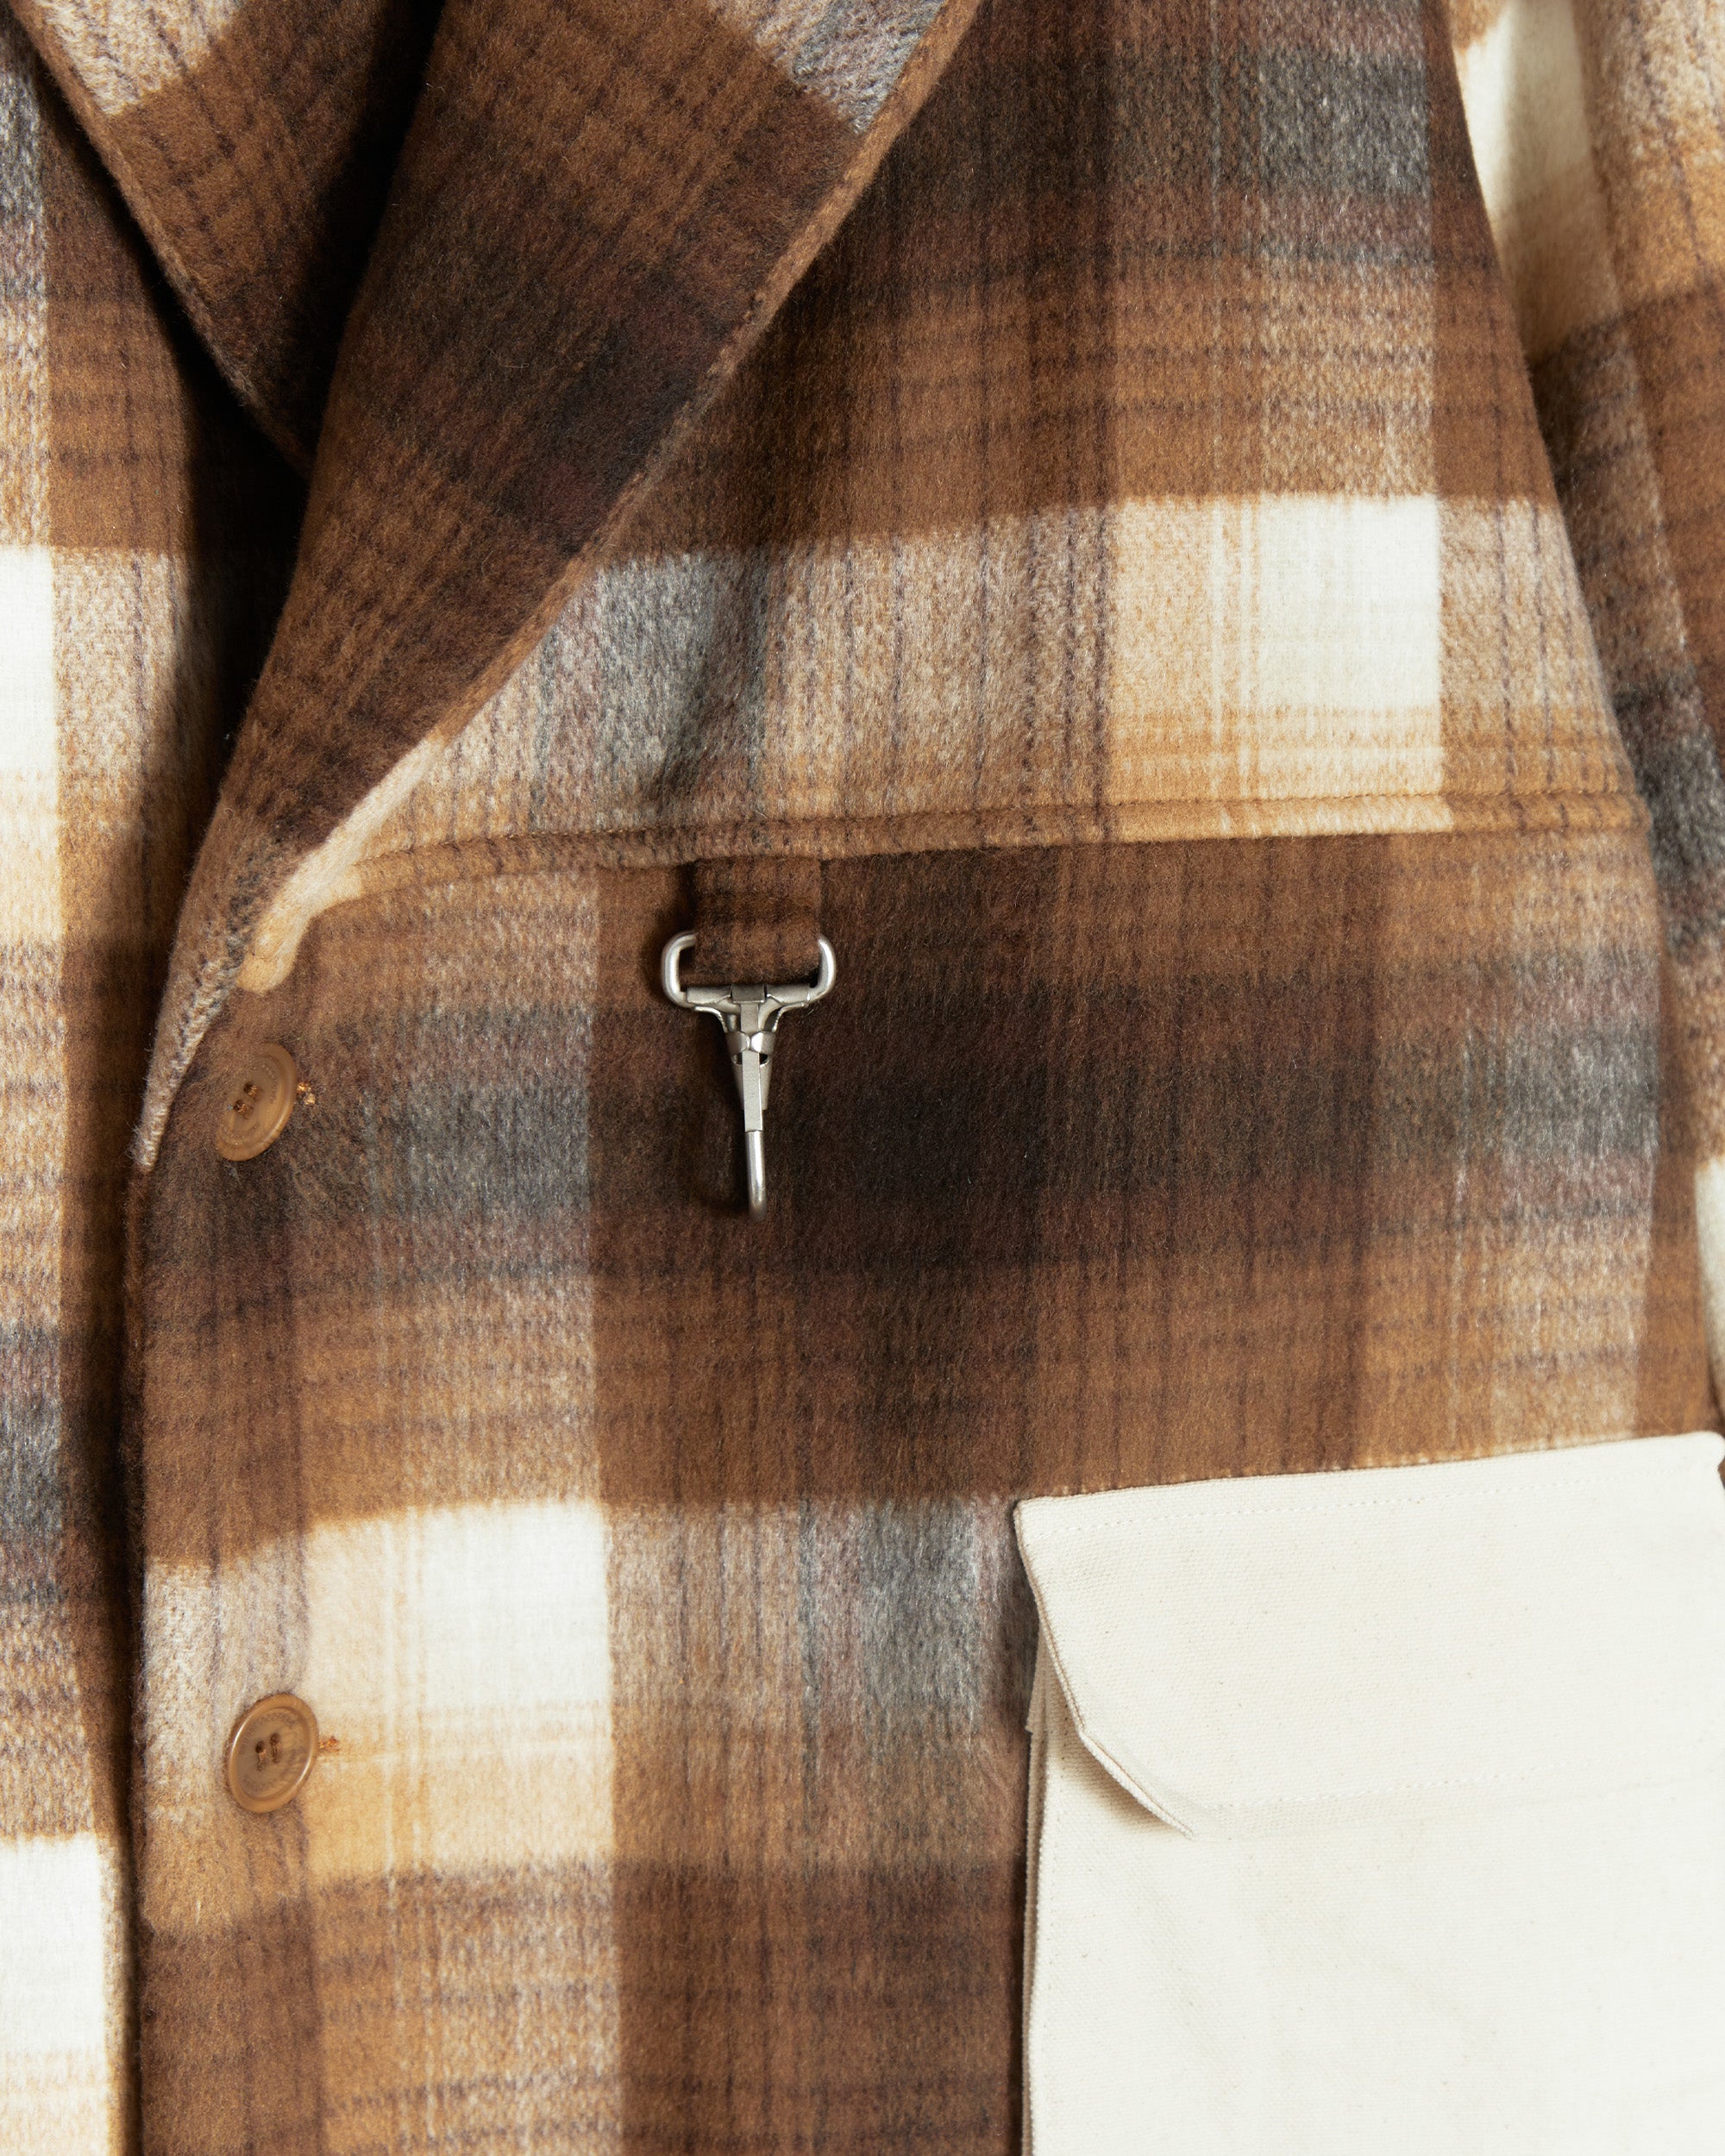 RCI Reserve: Womens Coat in Brown Wool Flannel